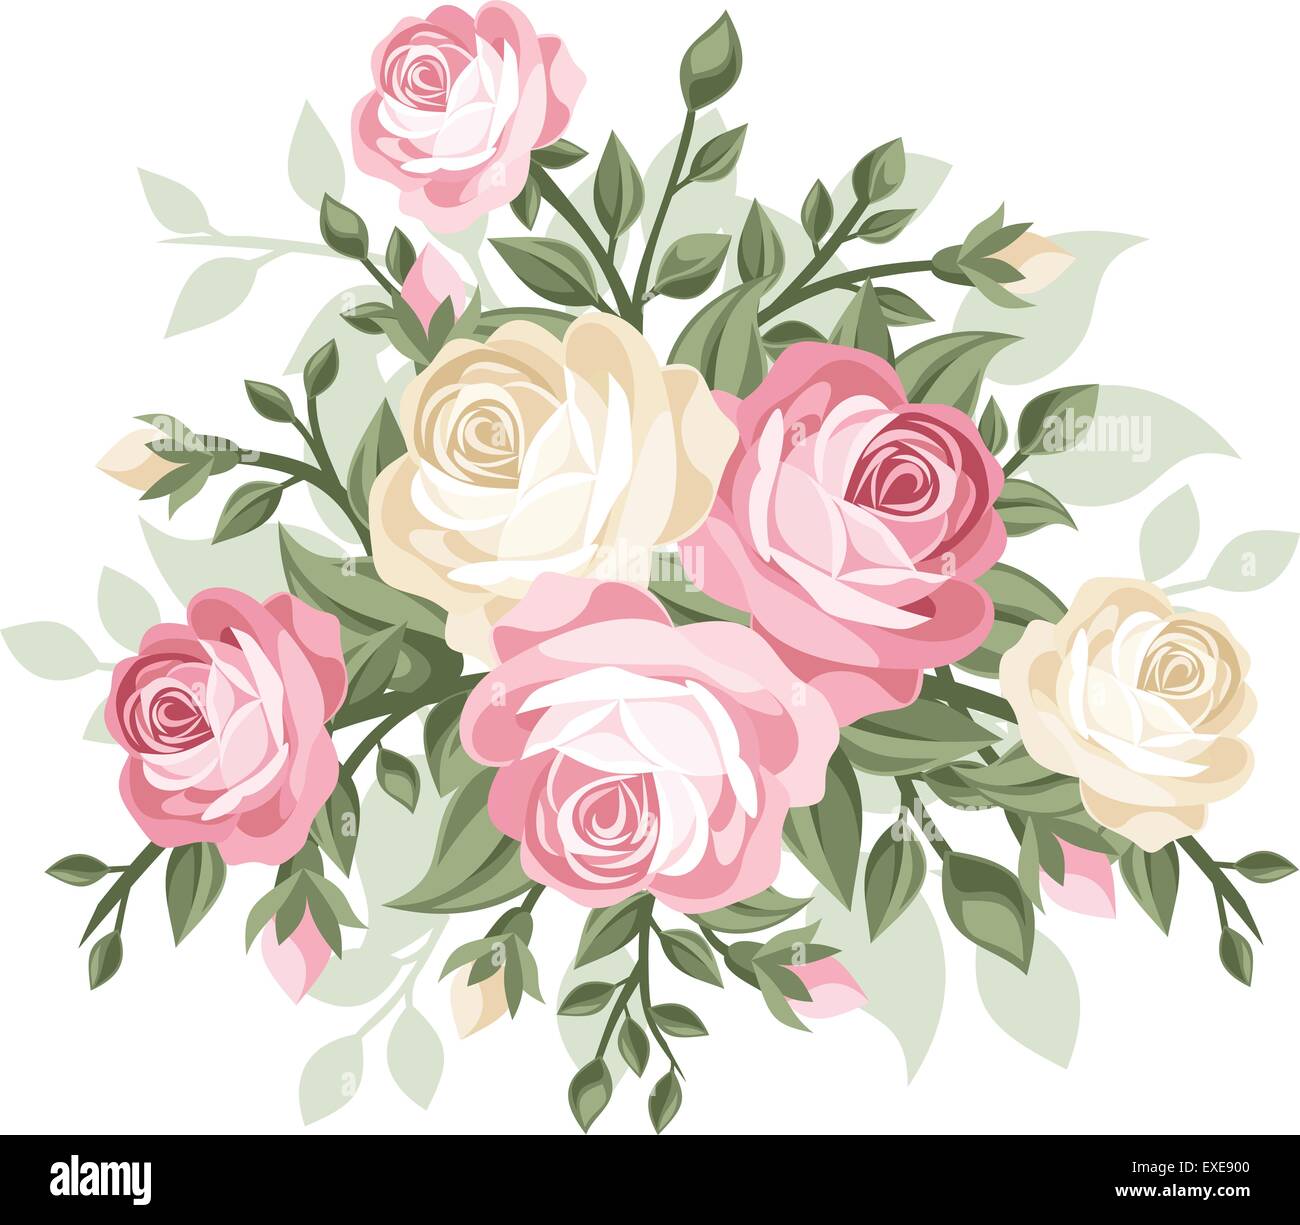 Rose pink and green buds Stock Vector Images - Page 3 - Alamy